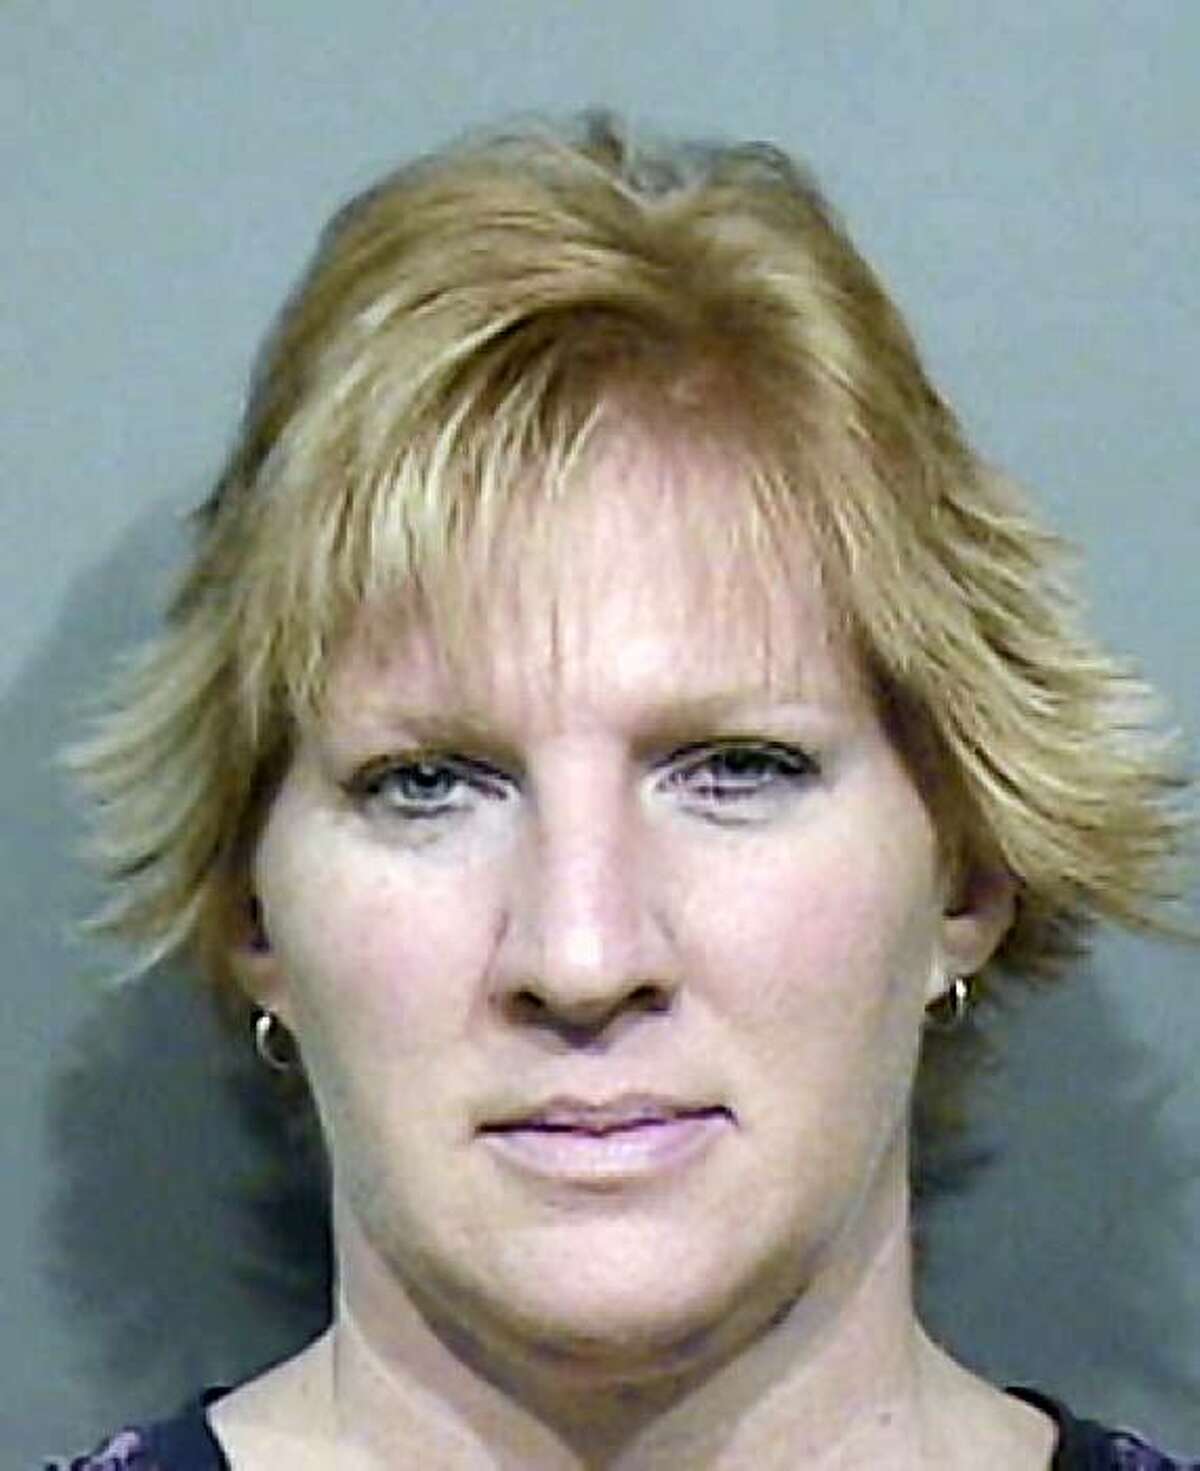 In this photo released by the Calumet County, Wis. Sheriff's Office, Wendy L. Sewell, 43, of Kaukauna, Wis. faces a charge of being a party to false imprisonment. Sewell is one of four women who tied up a man in an eastern Wisconsin motel, blindfolded him and glued a sensitive body part to get their revenge, authorities say. The four, one of them the man's wife, are charged with being party to false imprisonment in what amounts to a lover's triangle gone bad last Thursday, July 30, 2009, according to Calumet County court records. (AP Photo/Calumet County Sheriff's Office)